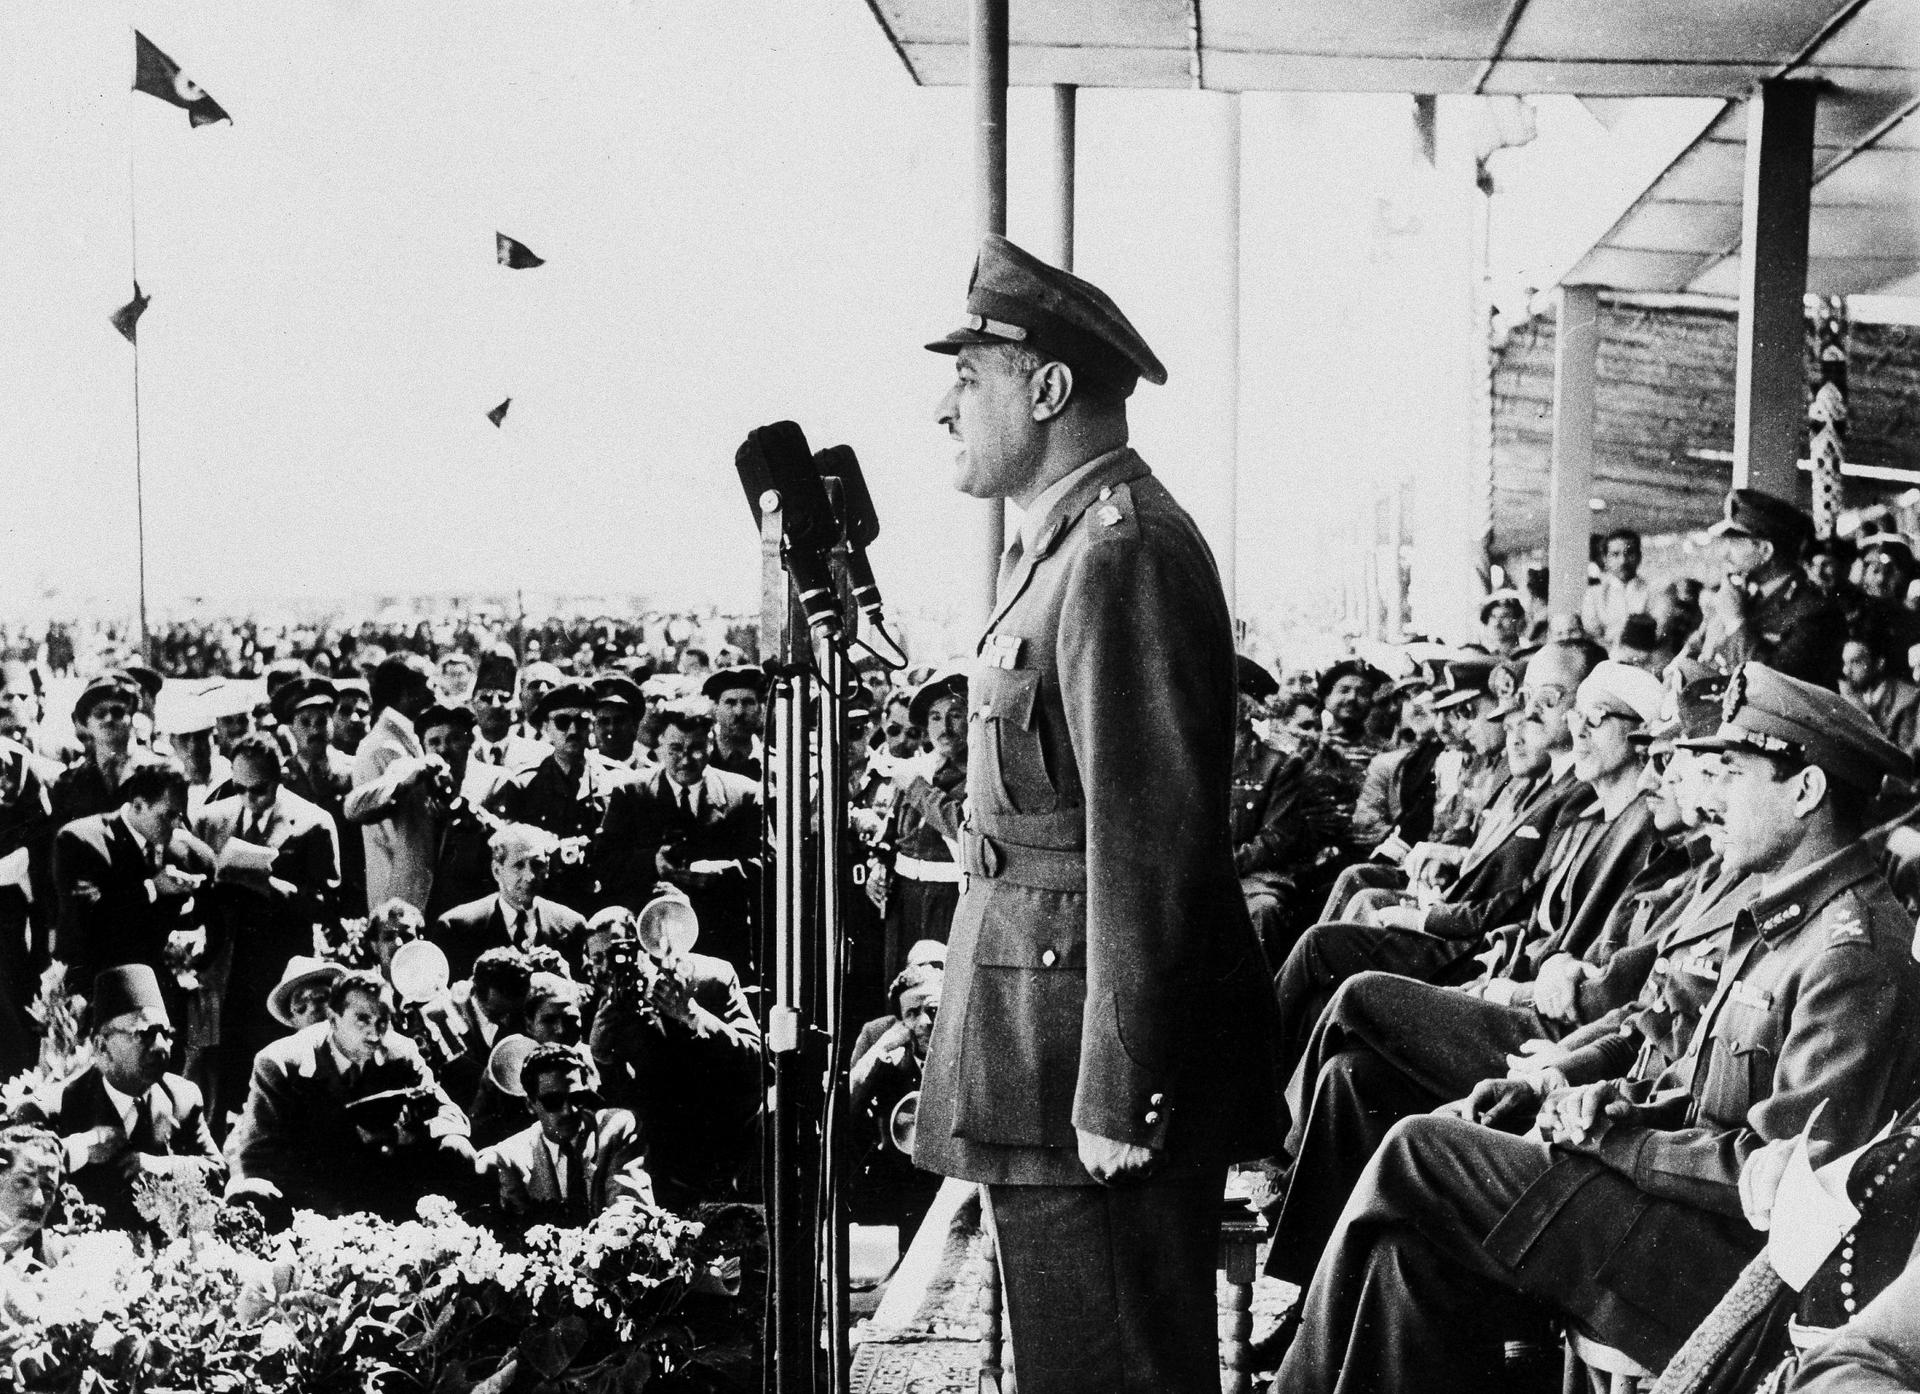 Egyptian President Gamal Abdel Nasser addresses troops on parade during ceremonies to raise the Egyptian flag over Camp Shalupa in the Suez Canal Zone, March 22, 1955.